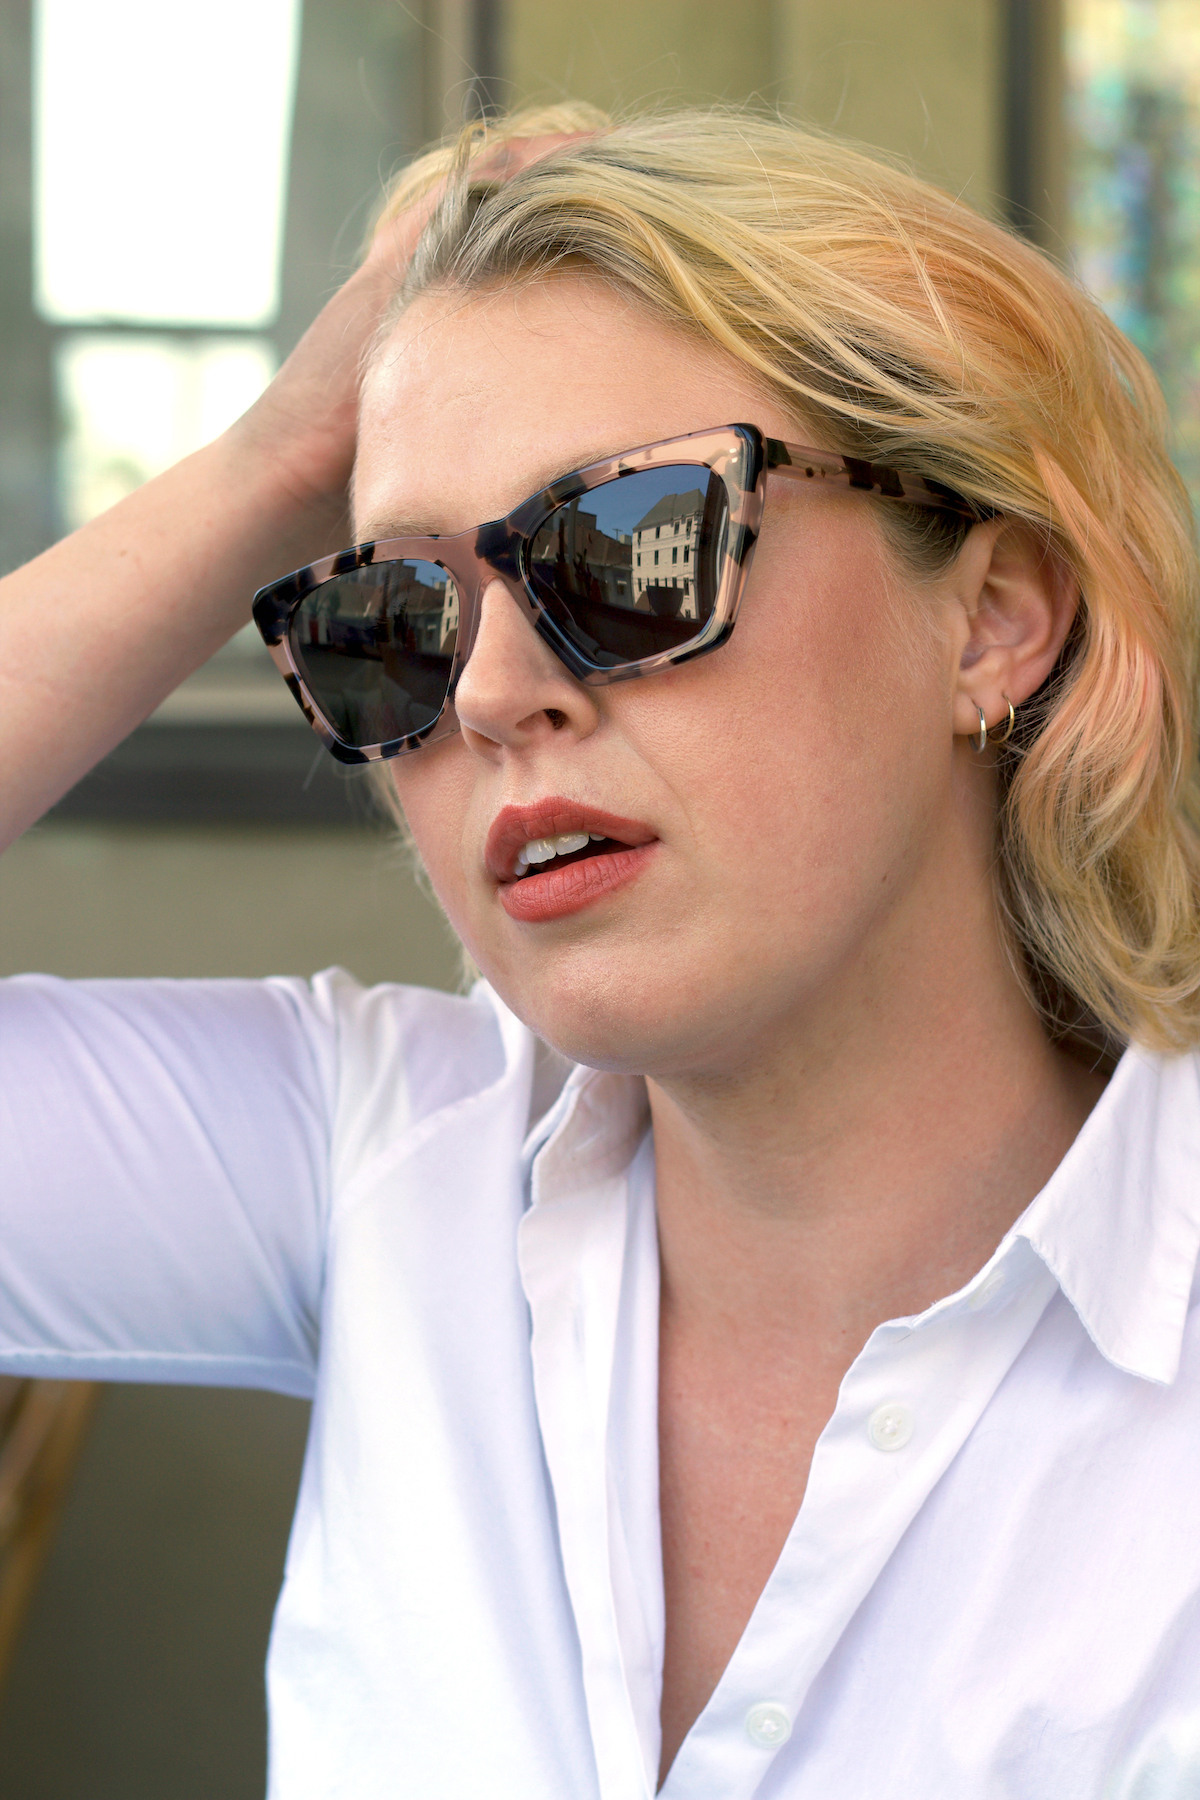 A person with blonde hair, wearing sunglasses and a white shirt, touches their head with one hand while sitting indoors.